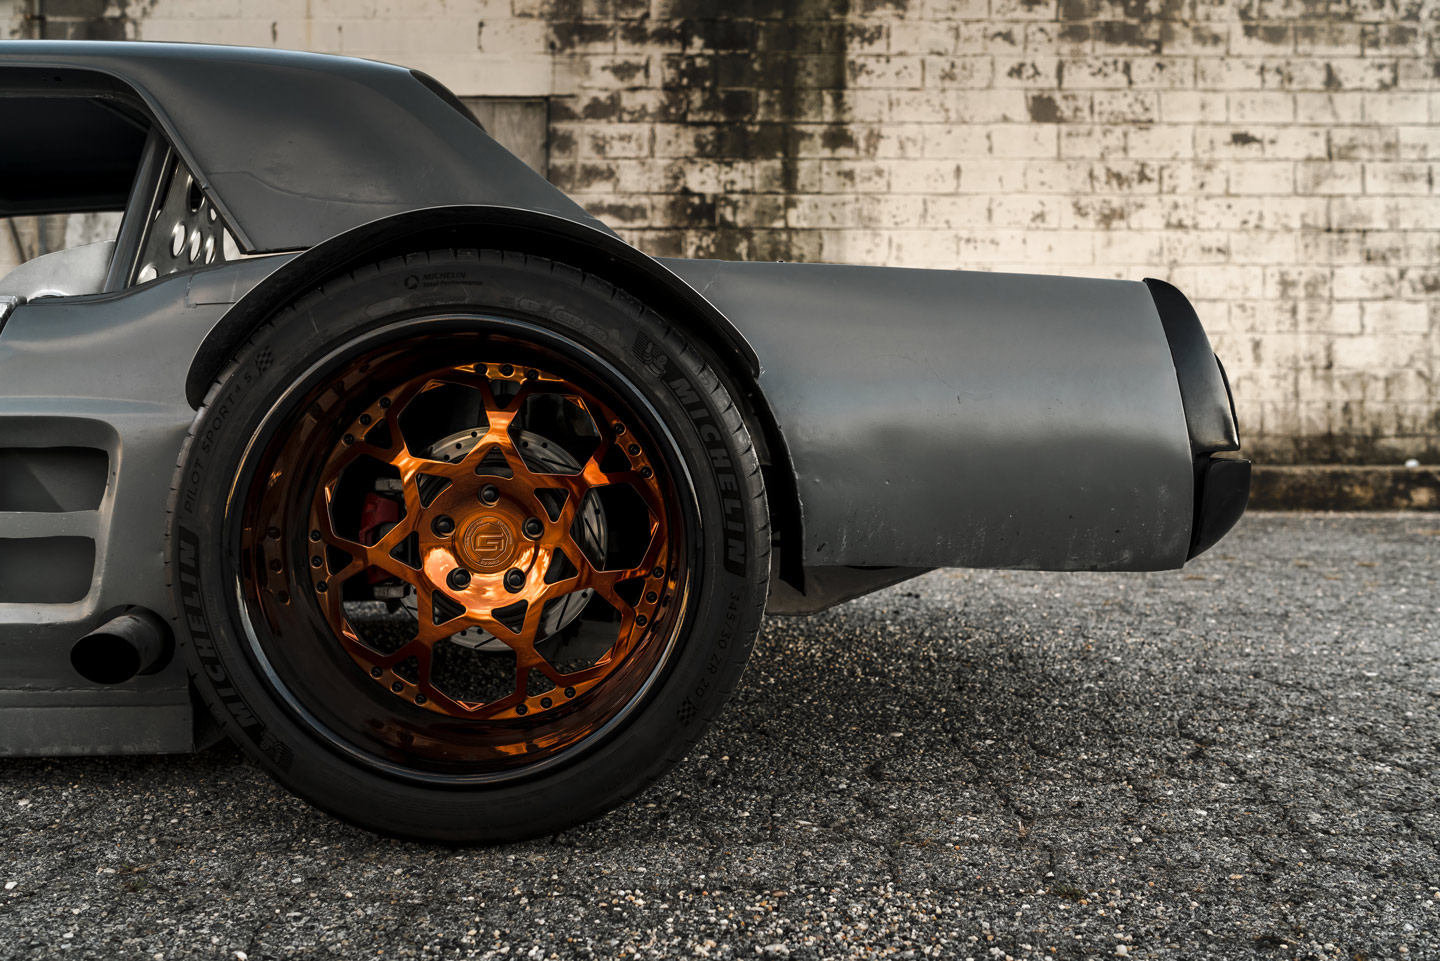 Forged Wheels Showcase 69Mustang LS1 G67 RUMI | GOVAD Forged